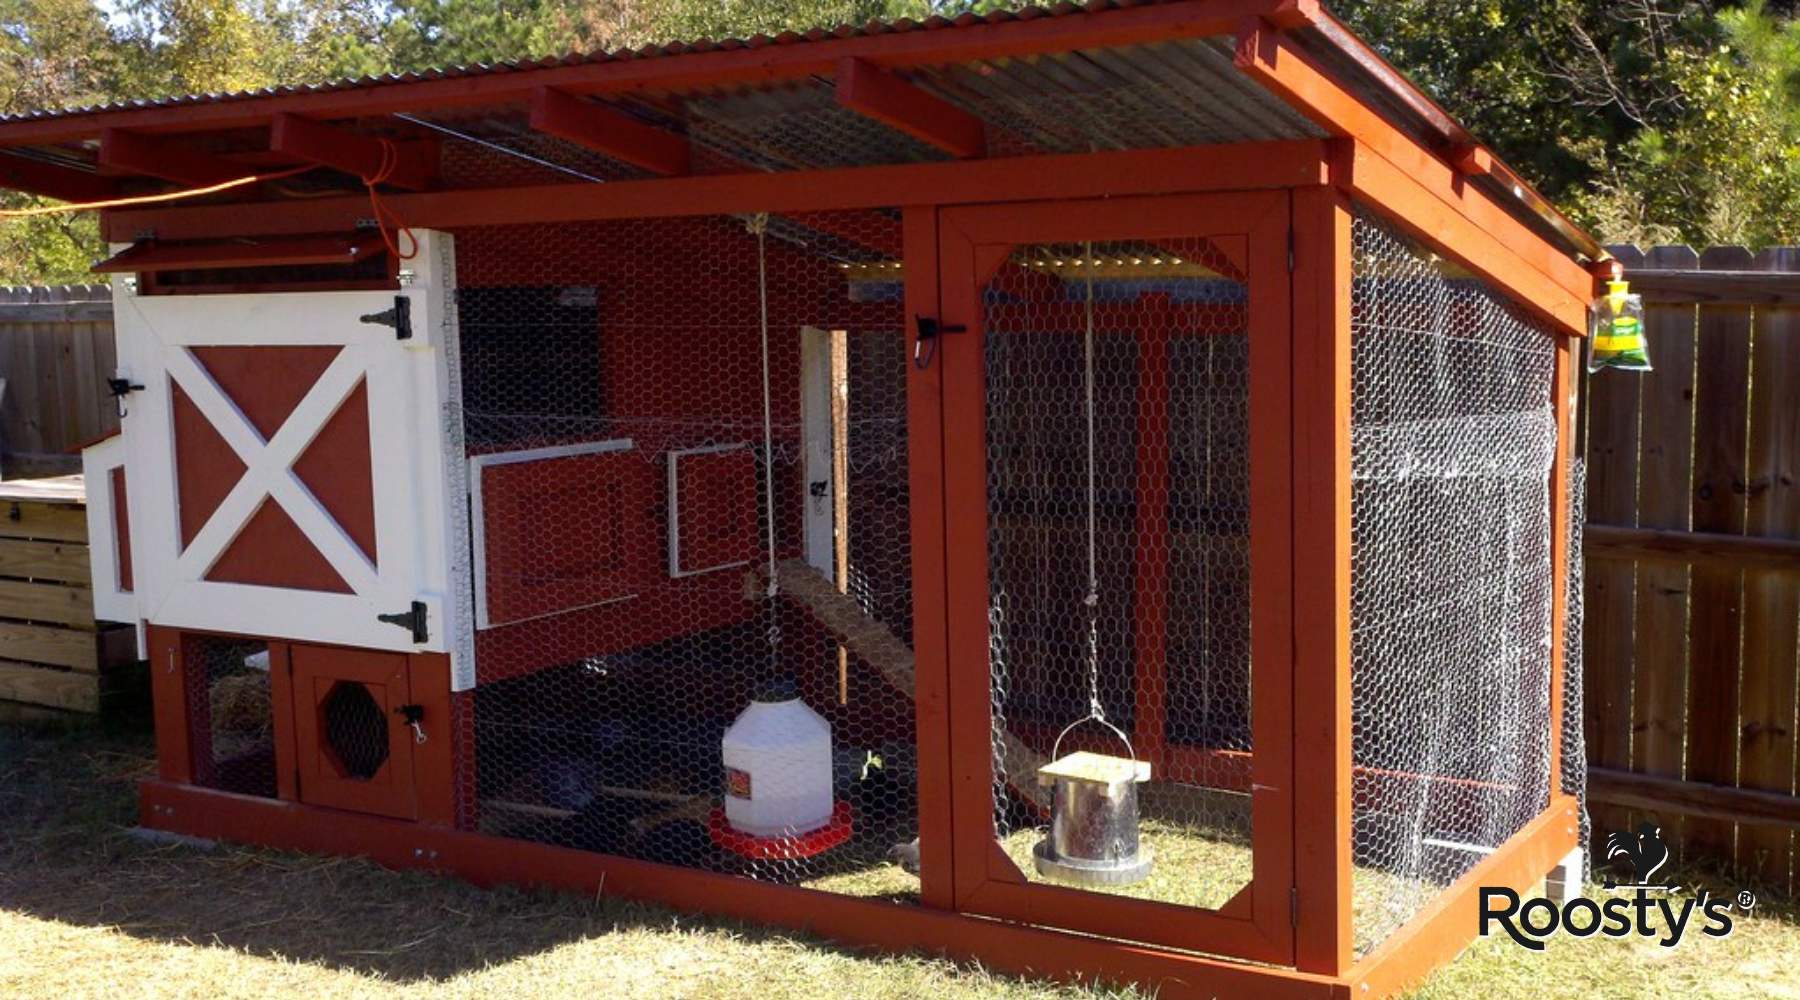 Cost-Effective Ways to Roof a Chicken Coop